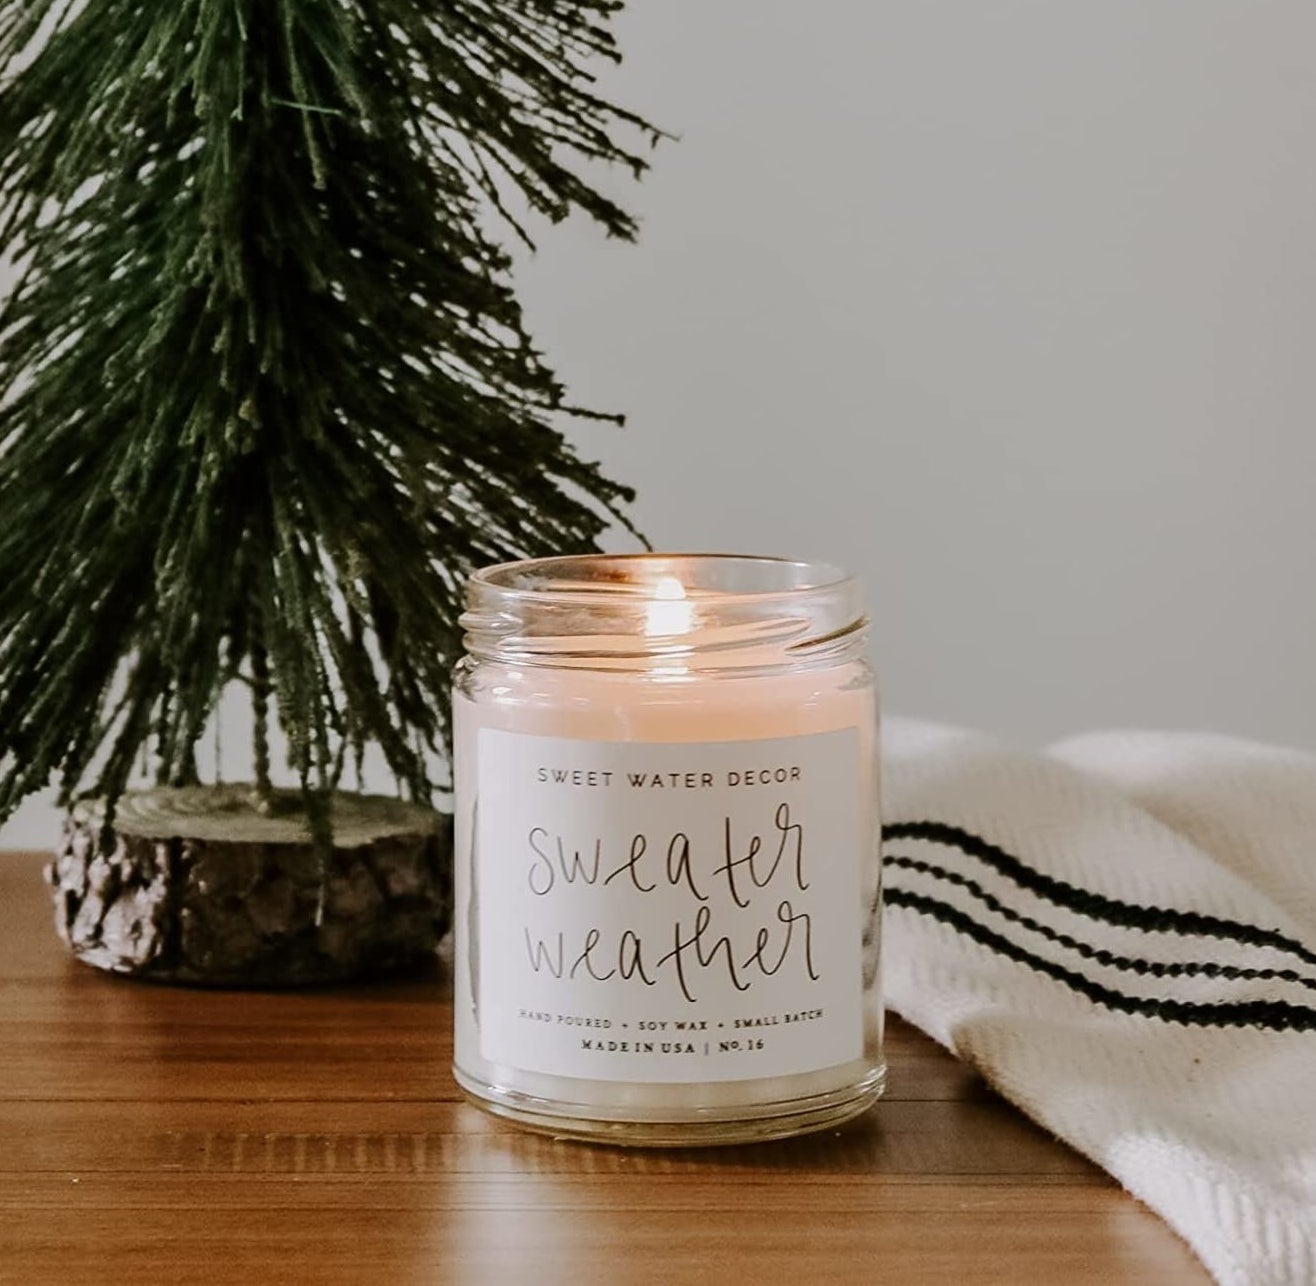 The sweater weather candle next to a mini tree